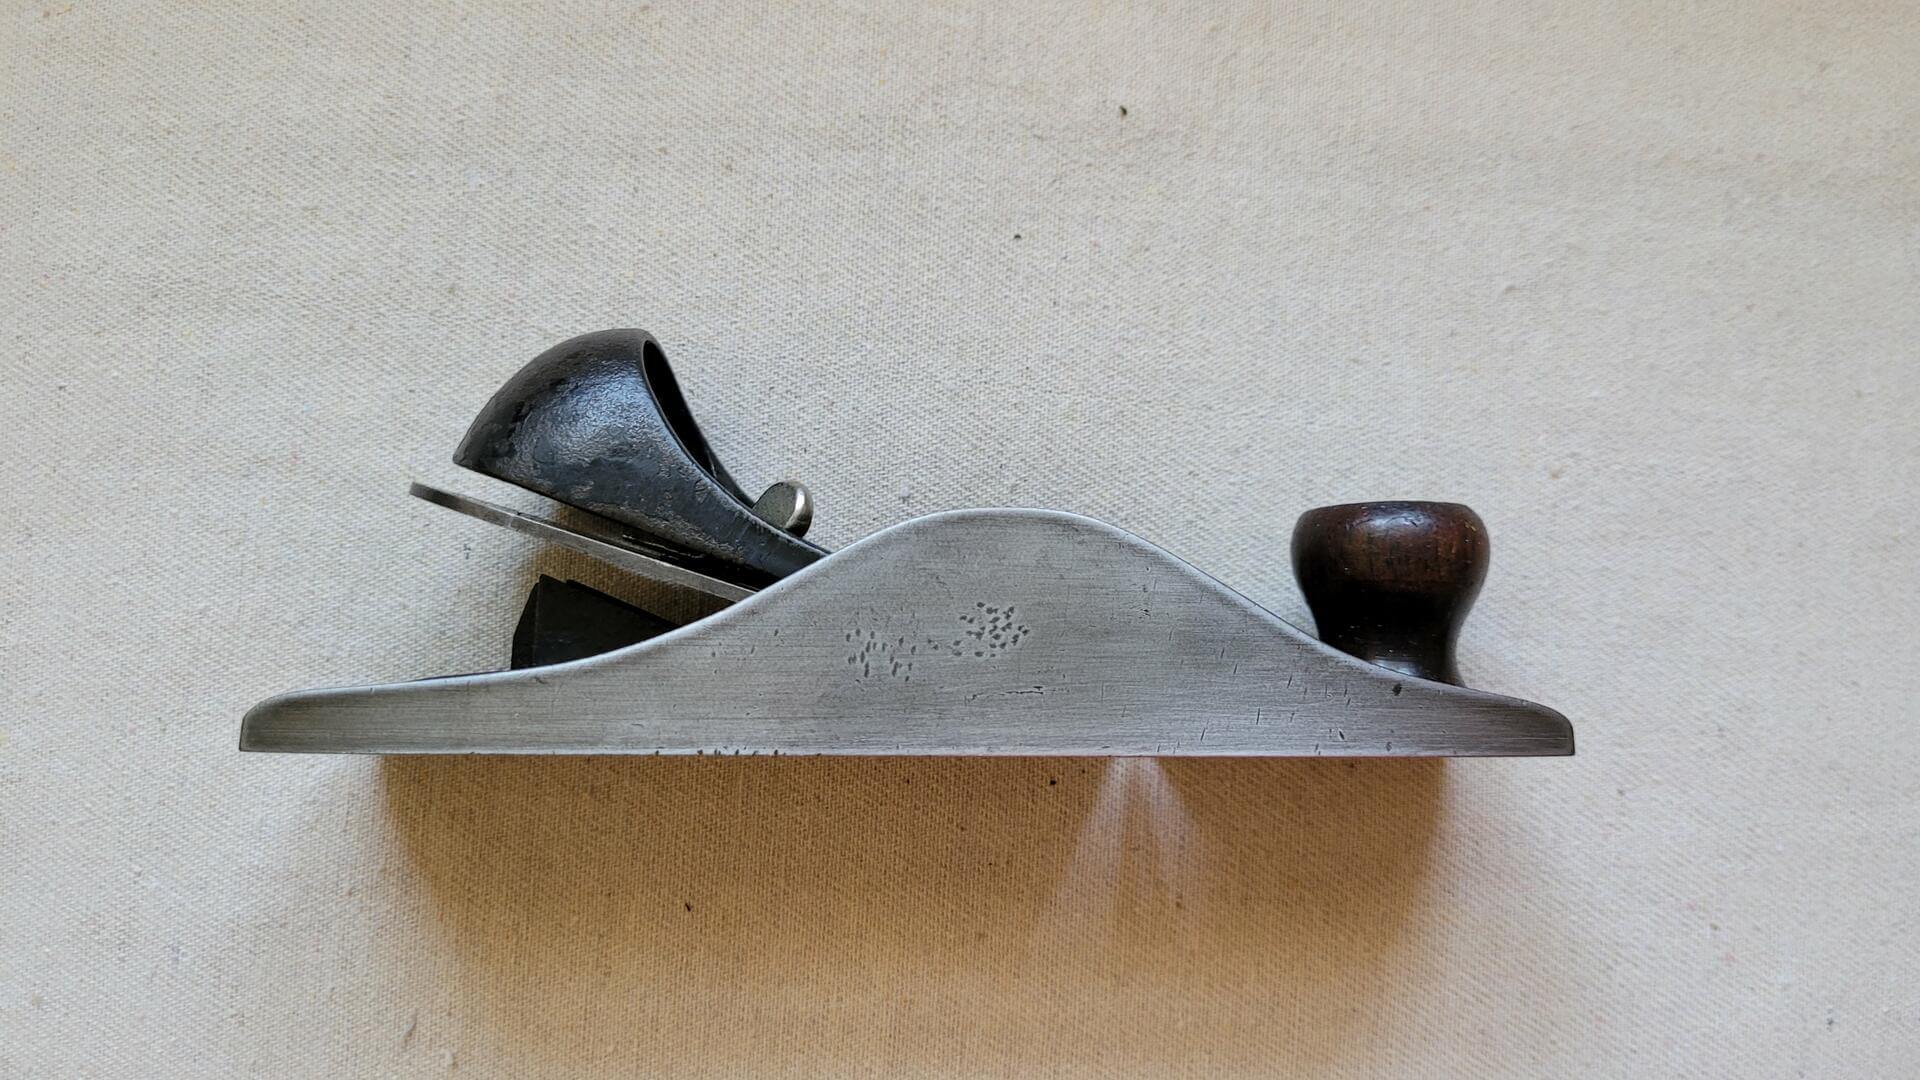 Vintage Stanley No 220 Woodworking Block Plane Pat 10-12-97 - Antique made in USA collectible carpentry and woodworking hand tools